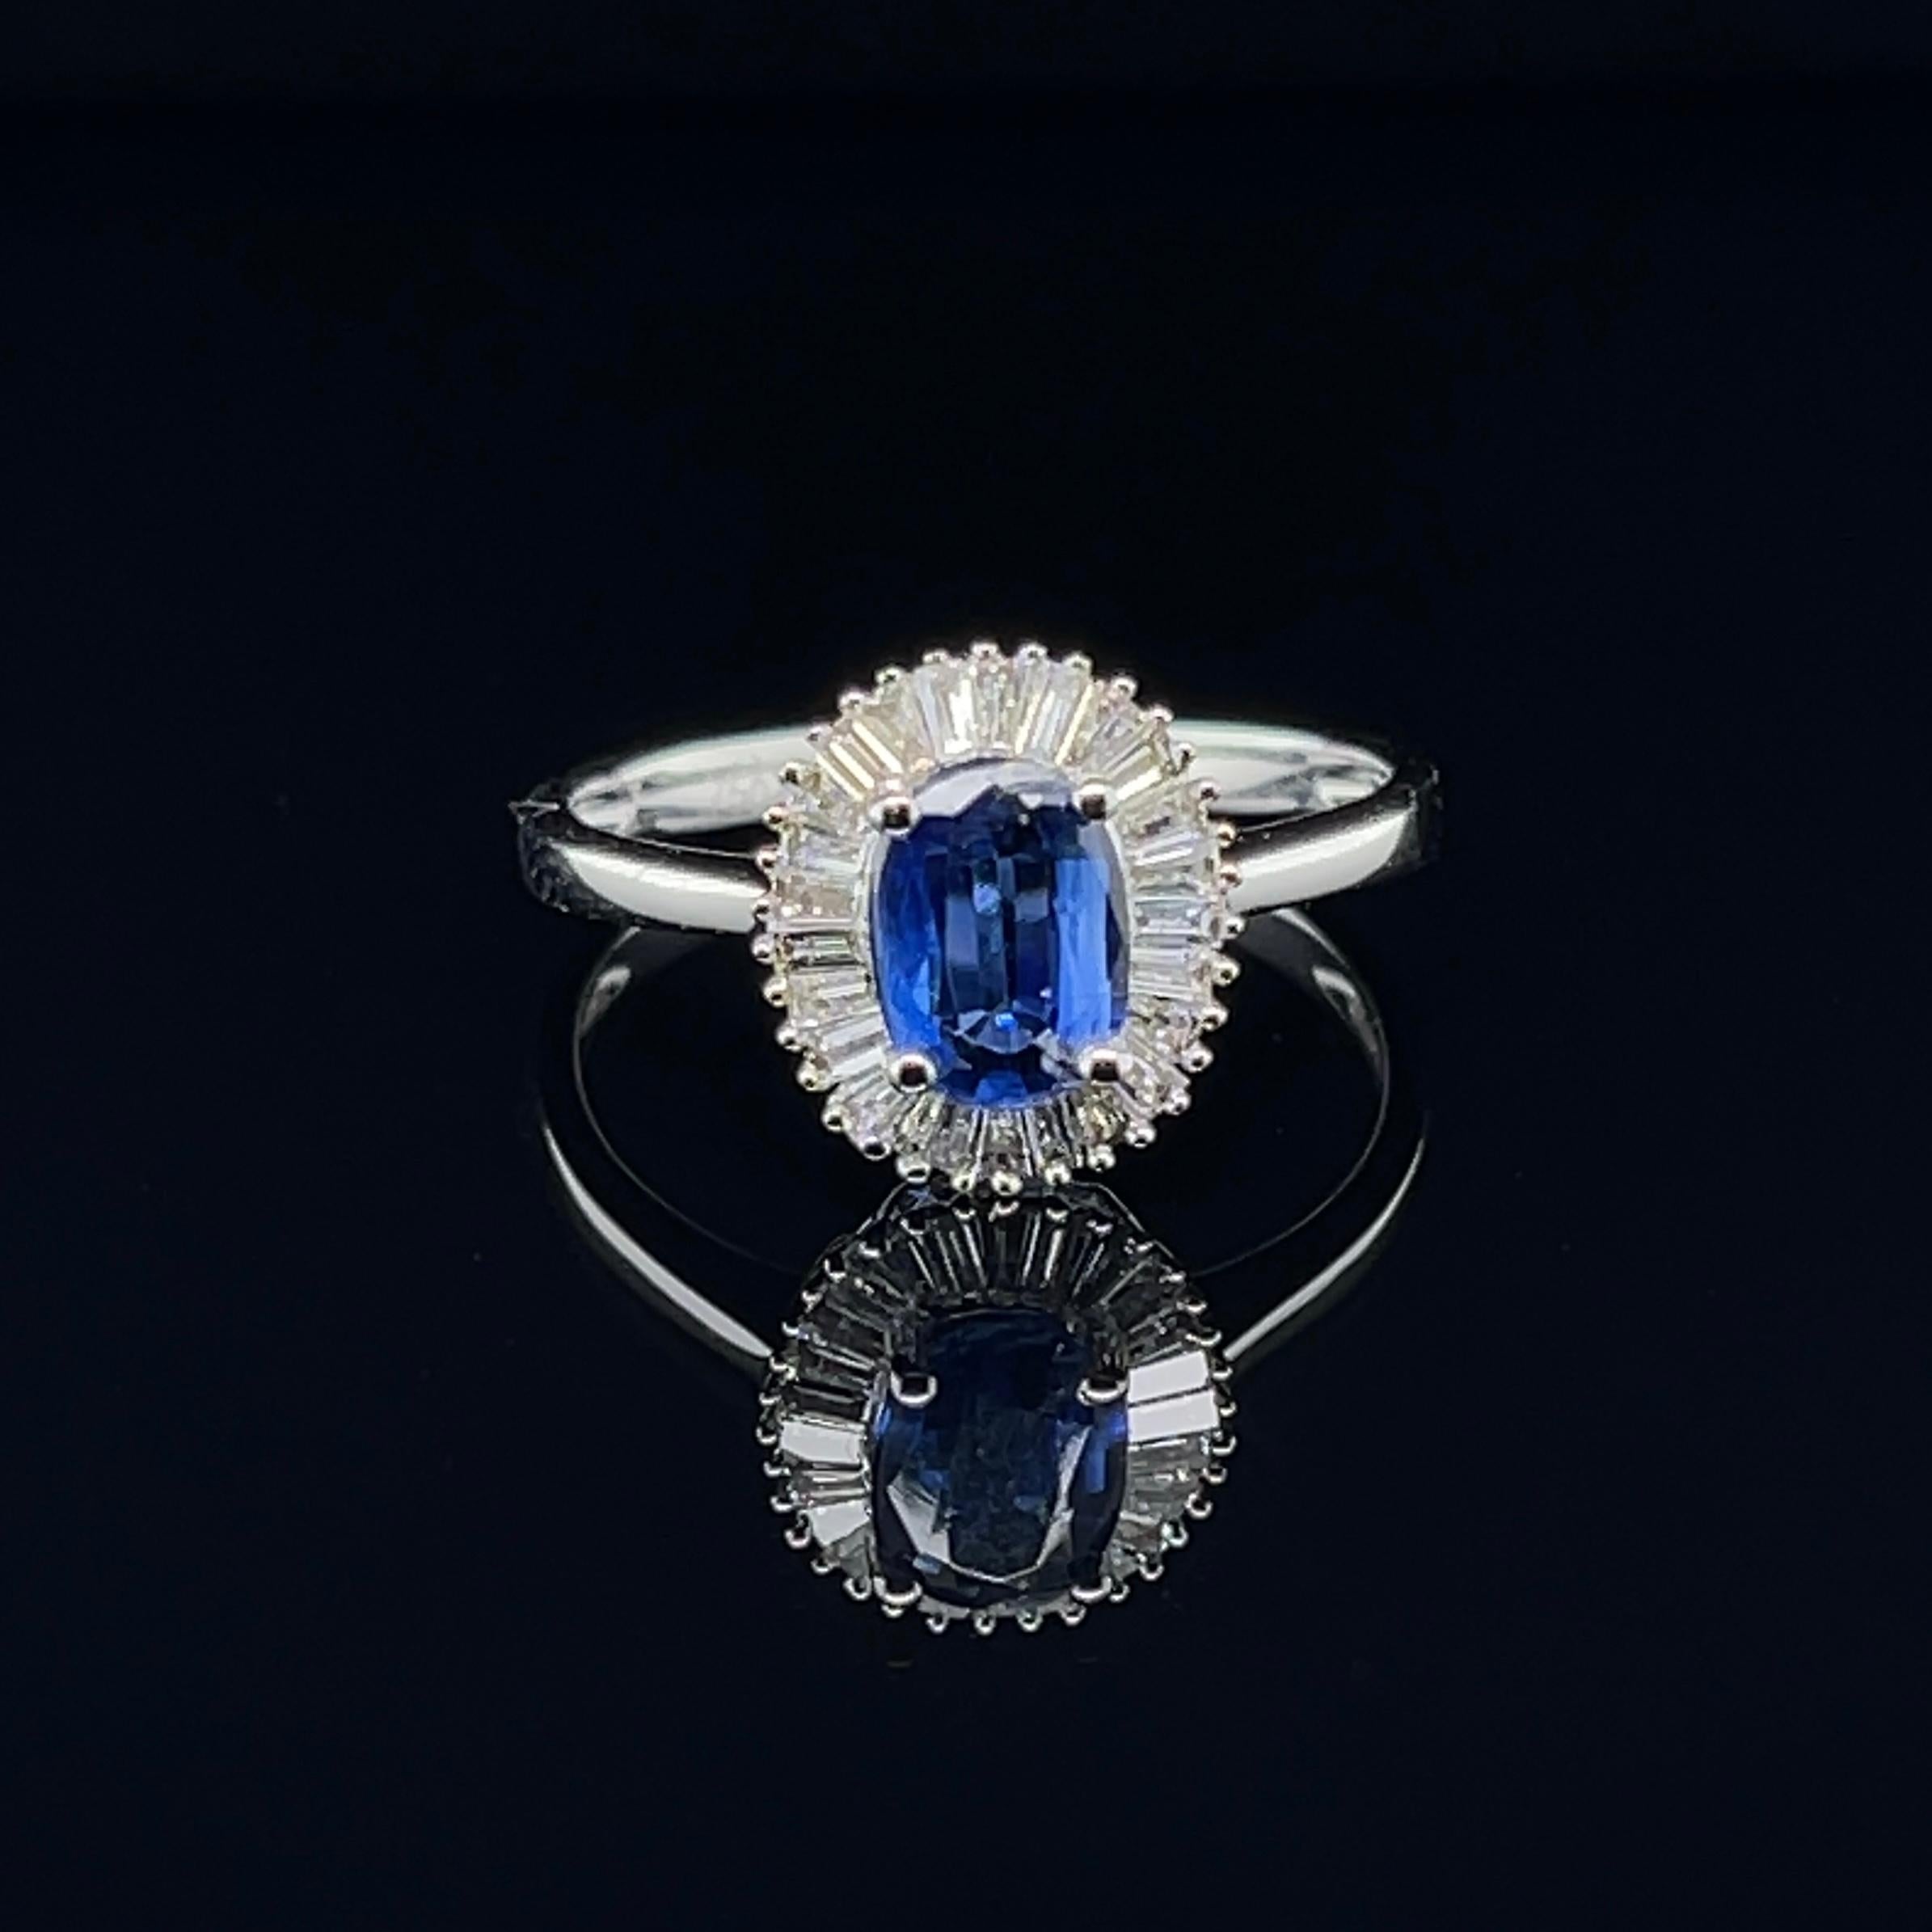 For Sale:  18ct White Gold Ring with 0.91ct Kyanite and Diamond